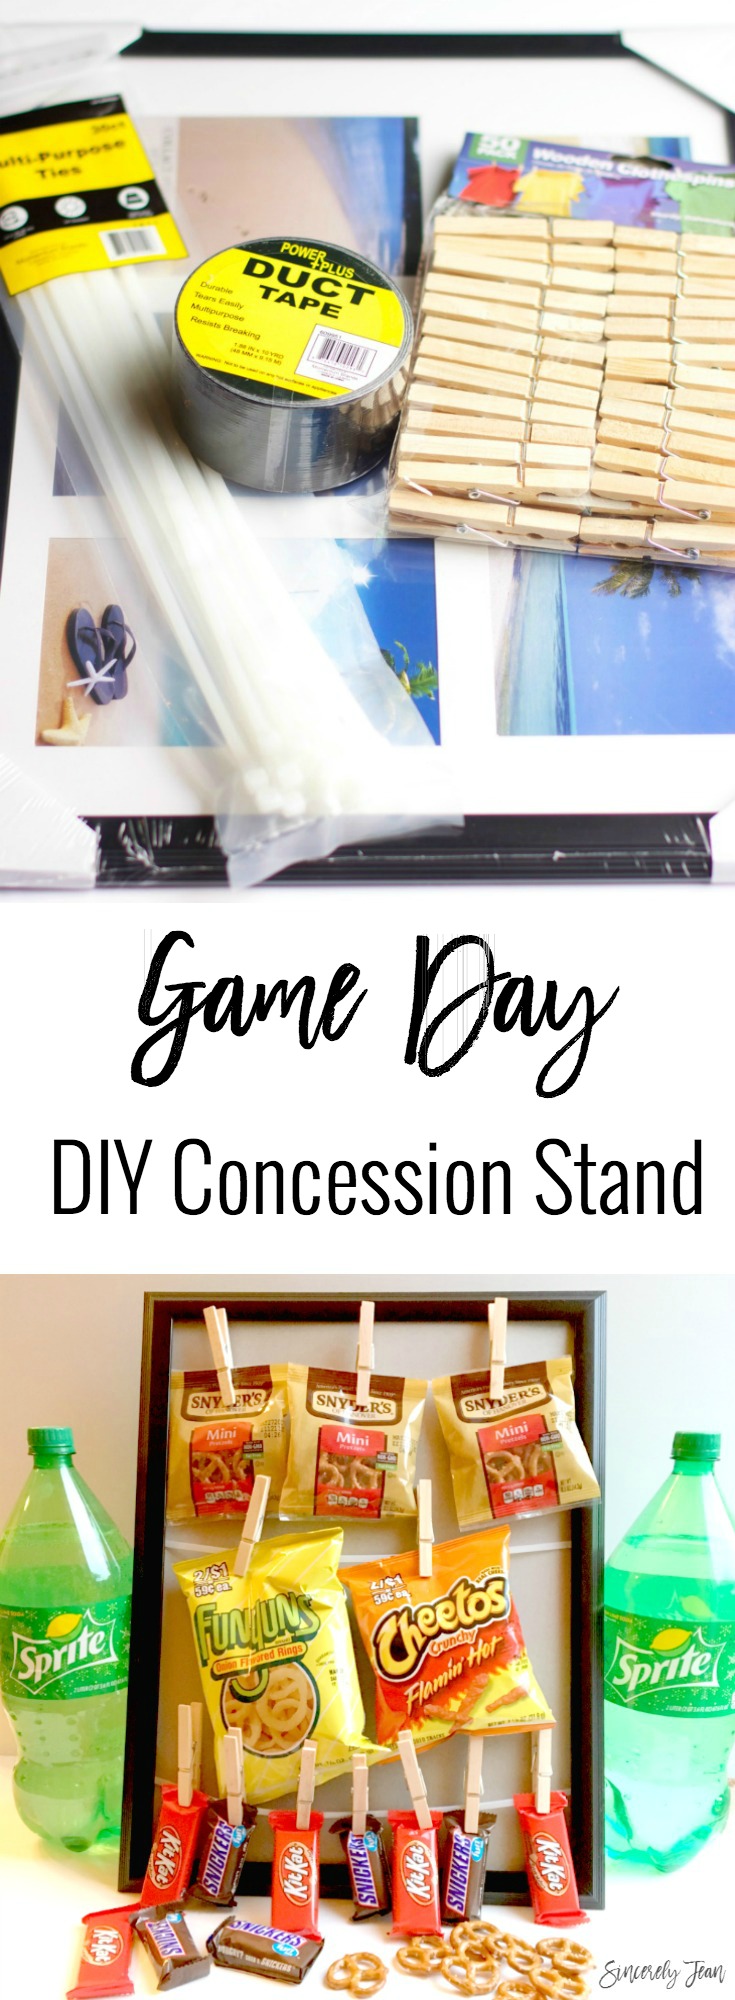 Decorations for Superbowl! DIY Concessions Stand Tutorial by SincerelyJean.com